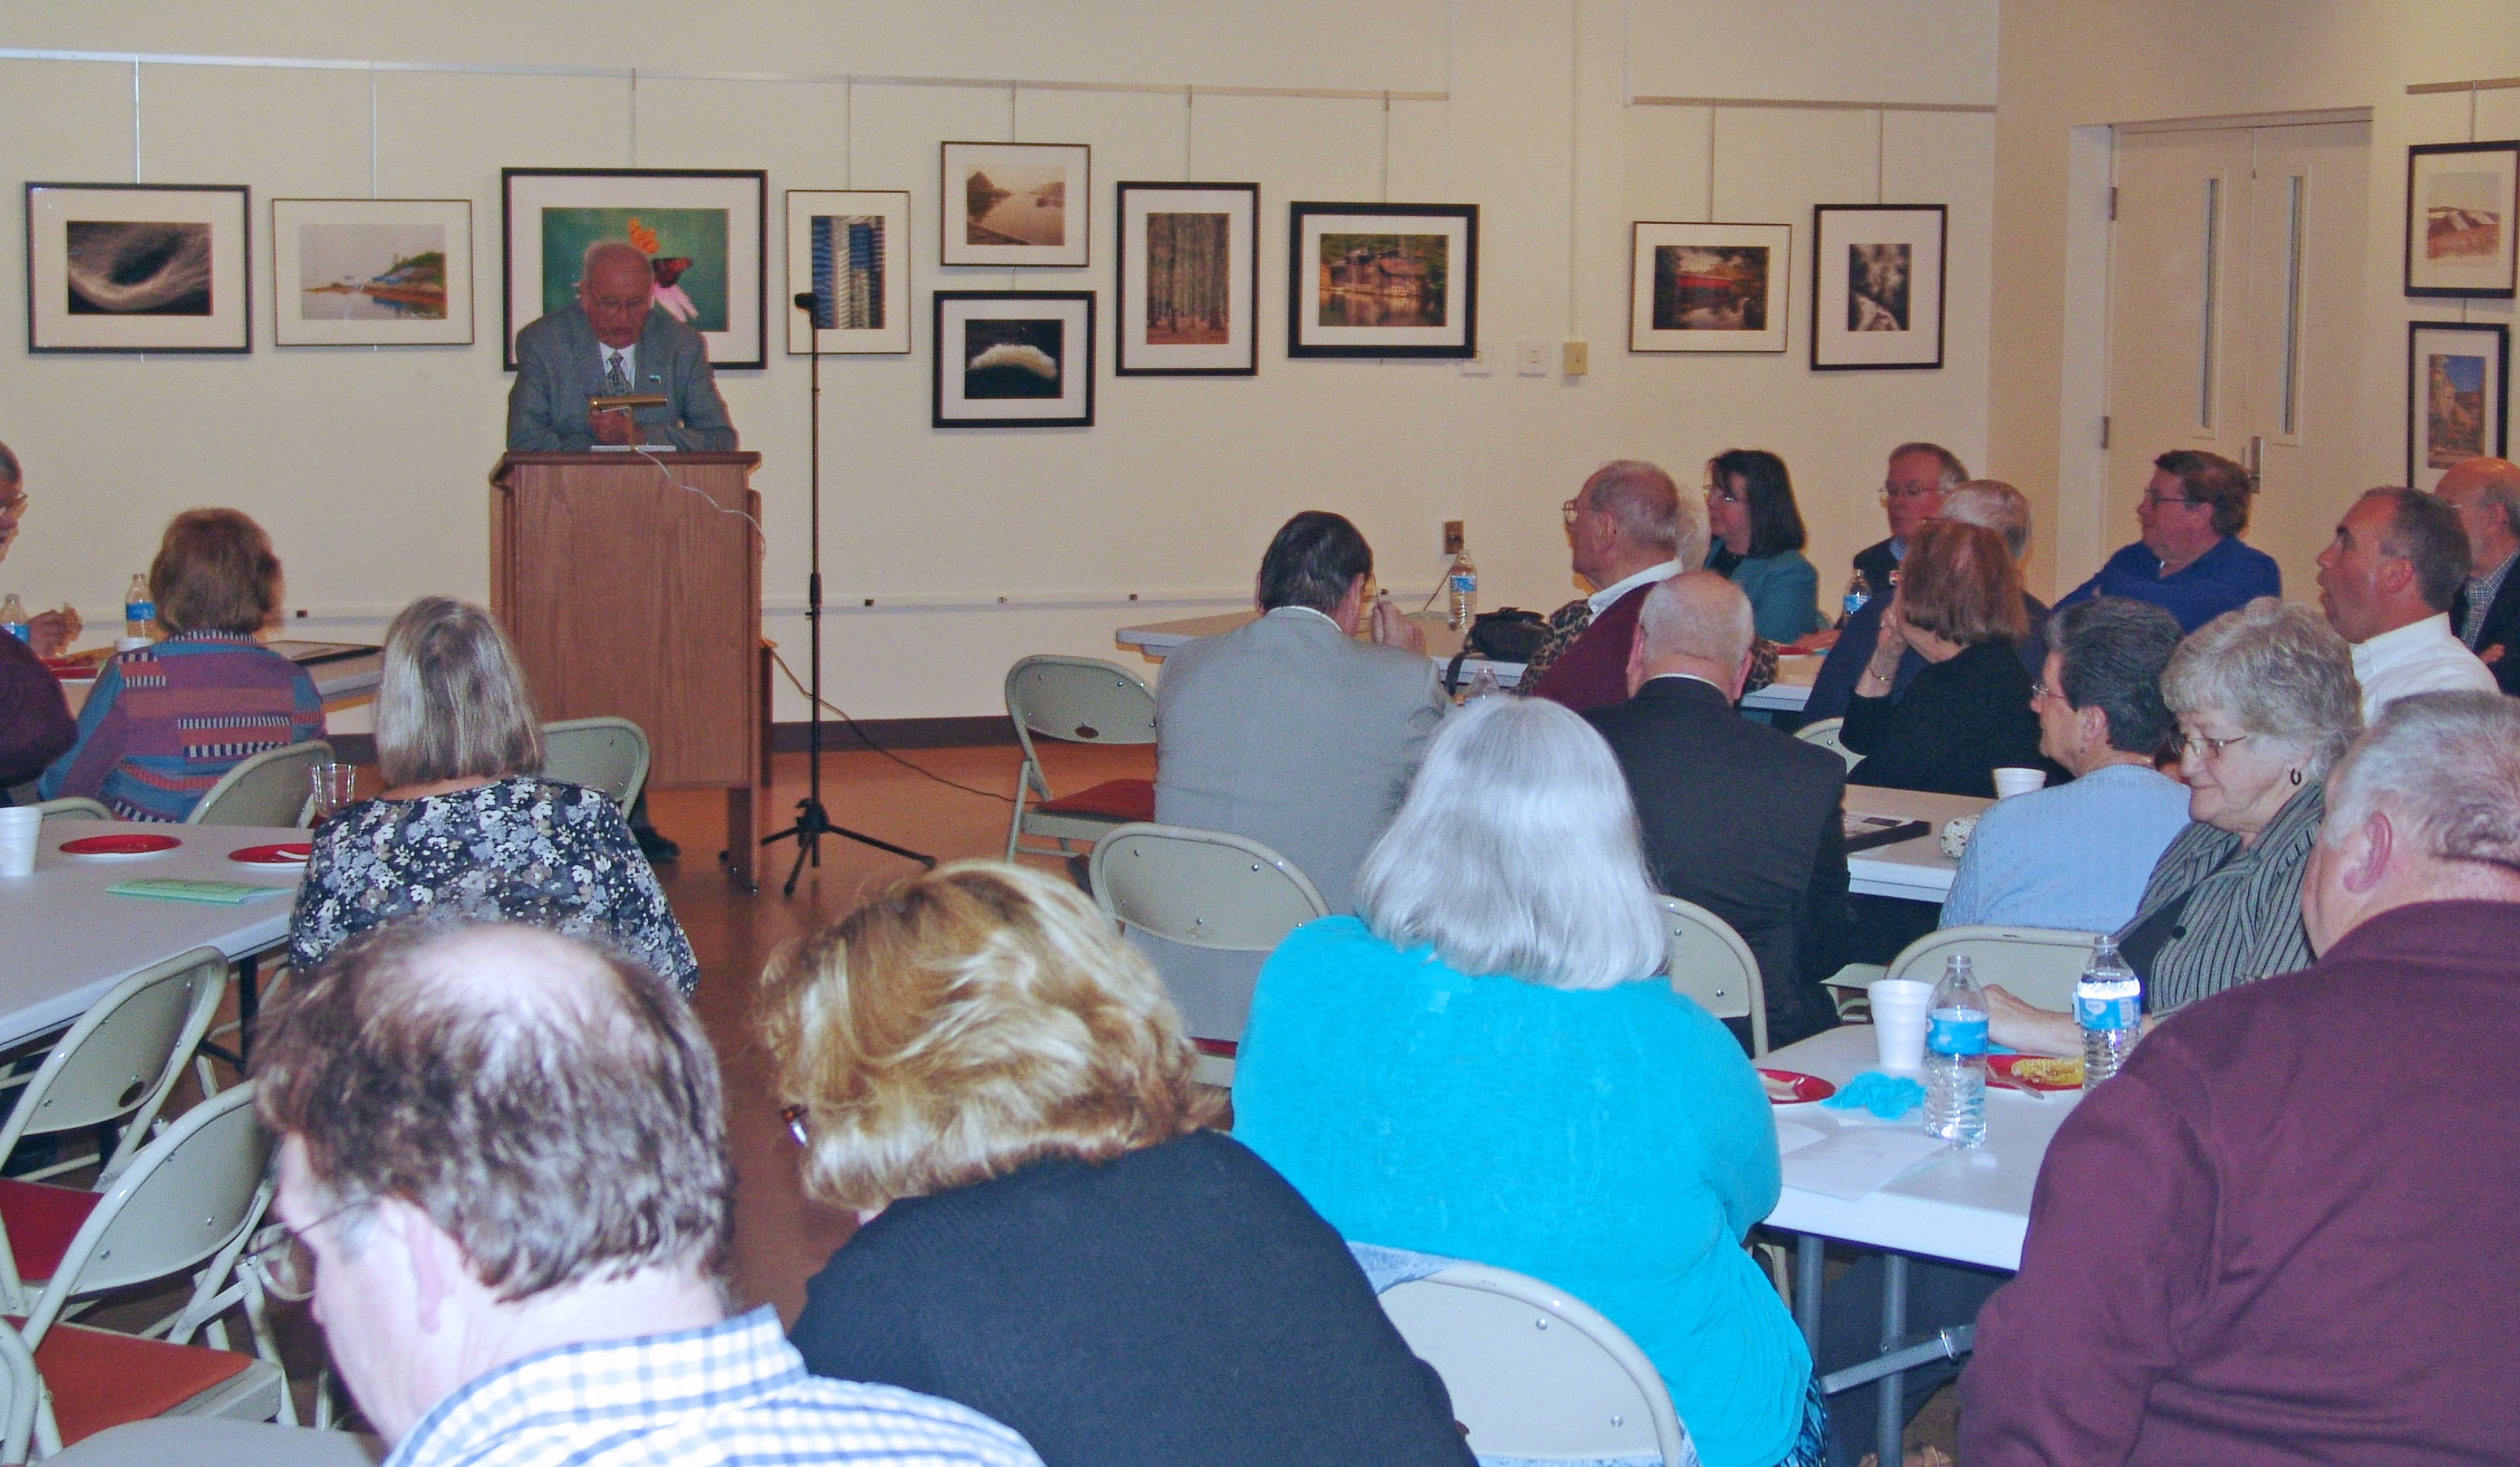 William E. Nichols, Sr. speaking on “The History of Our Valley and the Williamsport Municipal Water Authority”